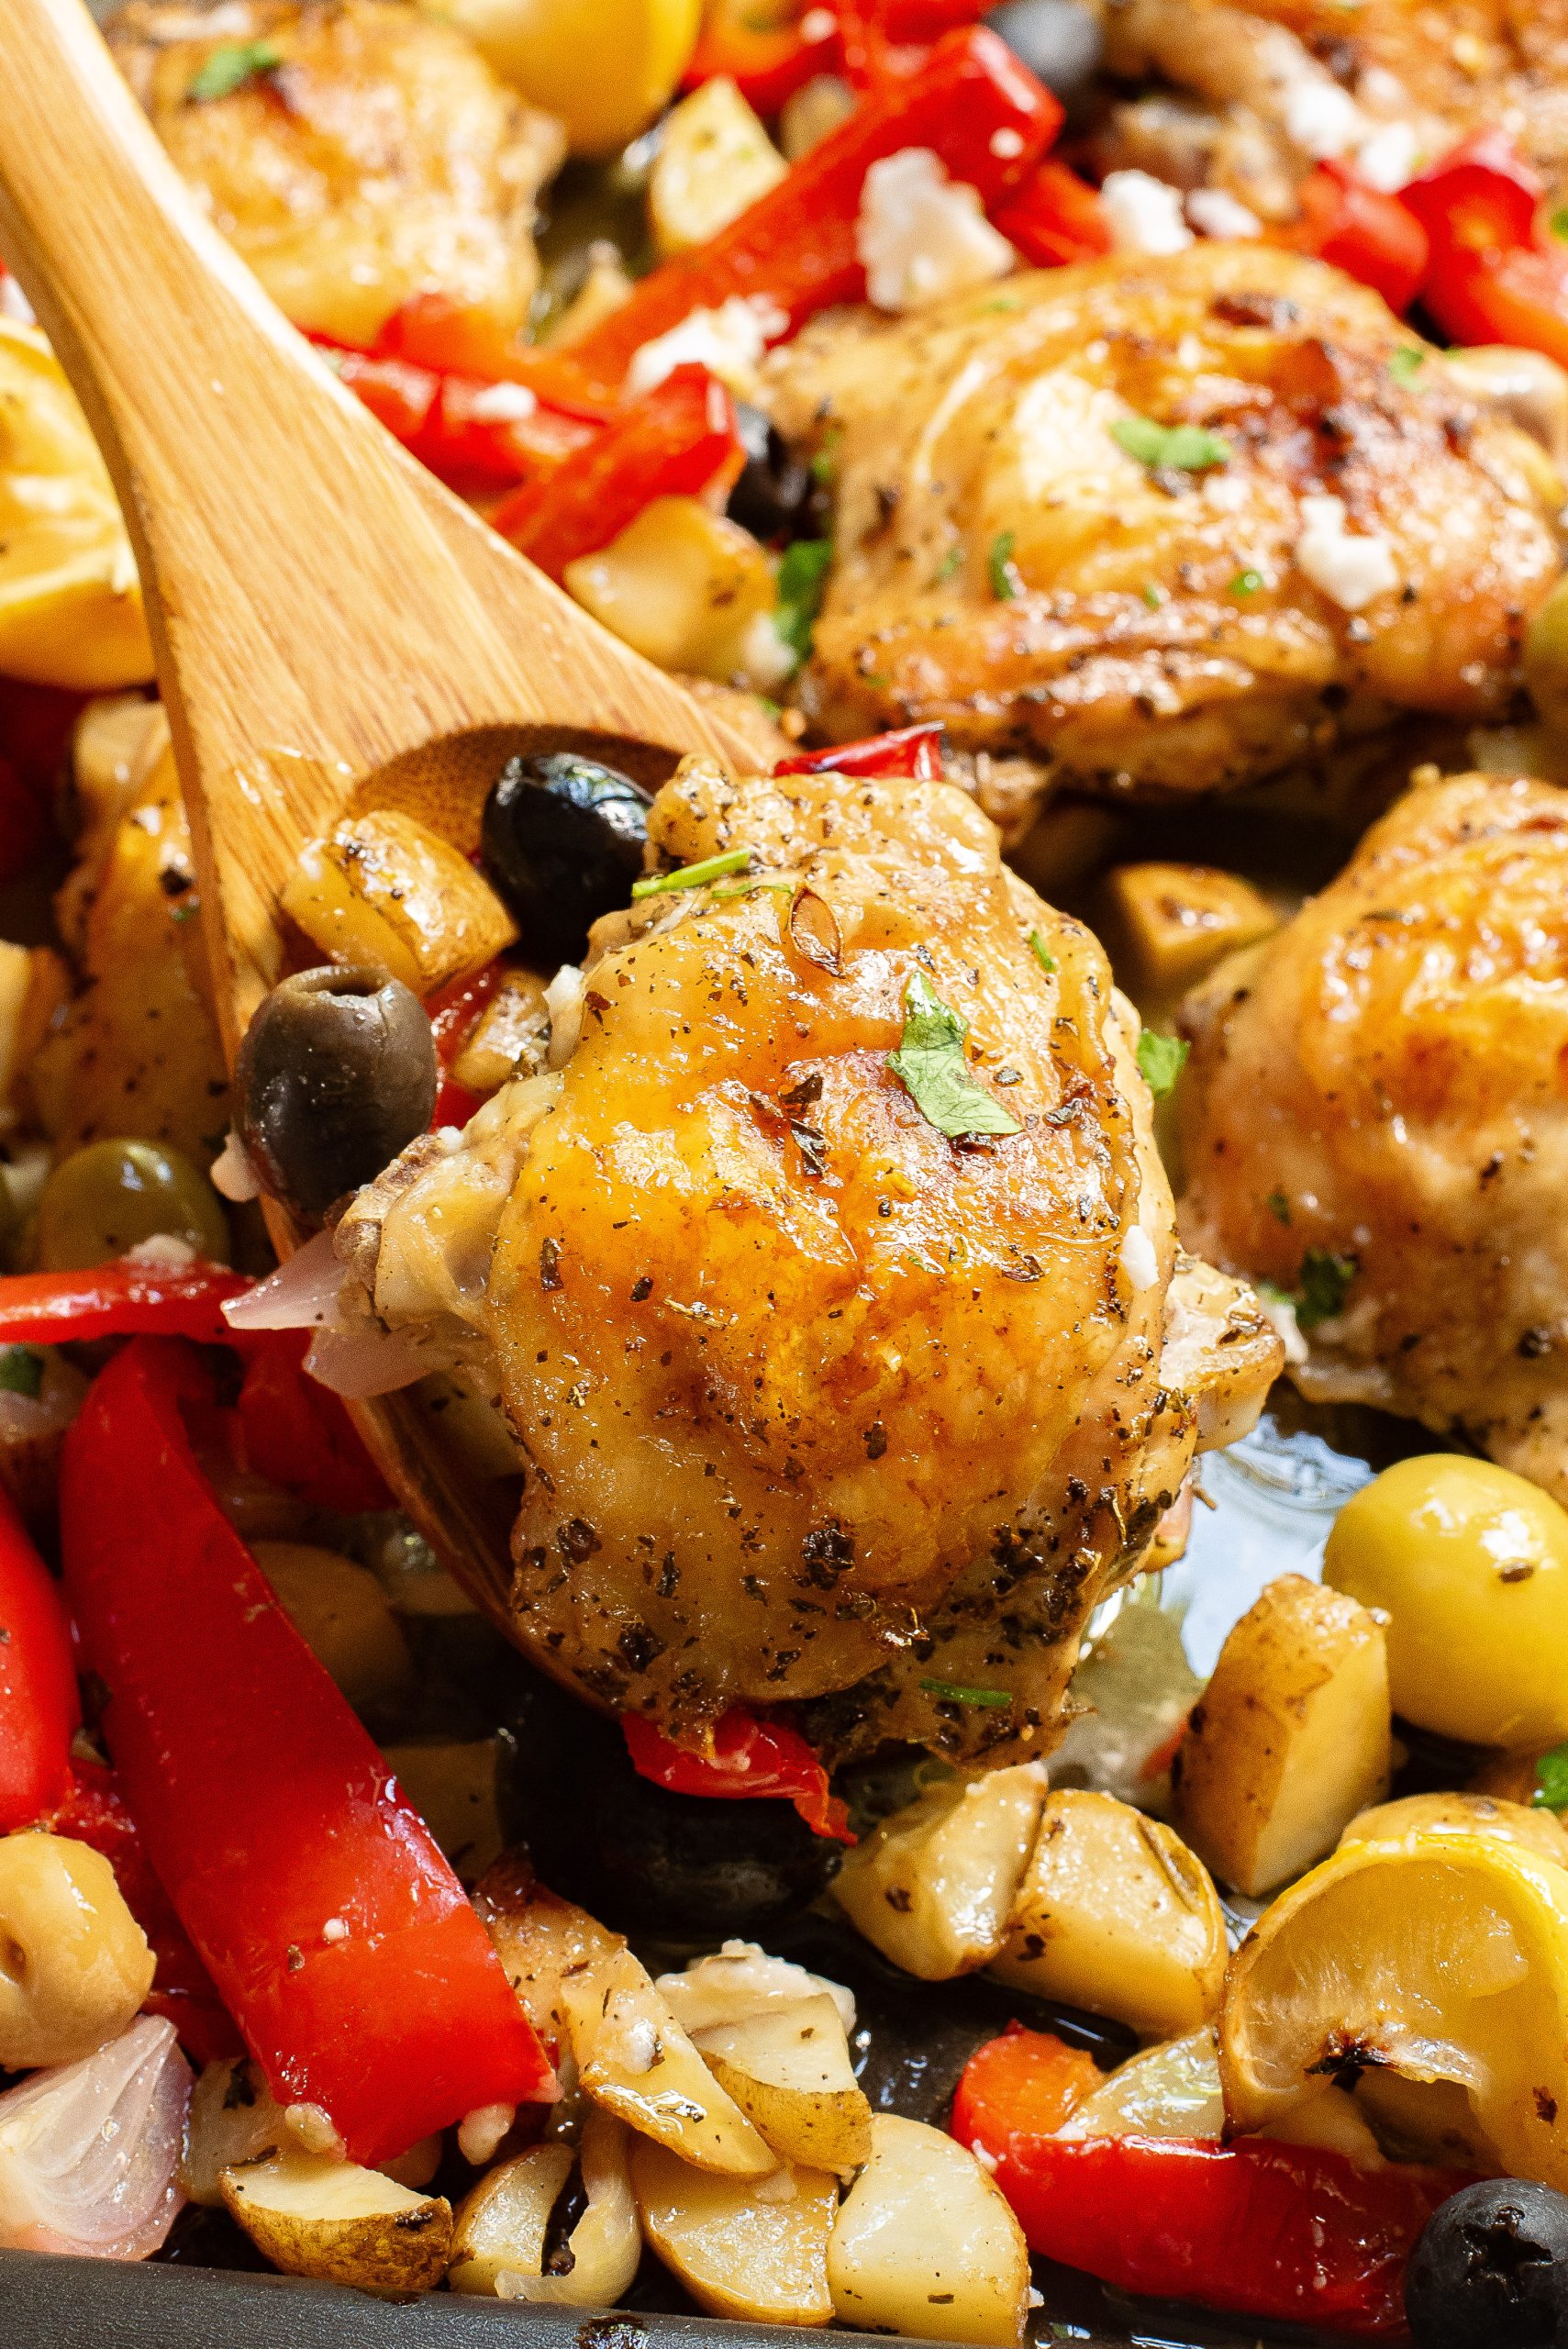 Roasted chicken pieces with mixed bell peppers, olives, and herbs in a baking dish.